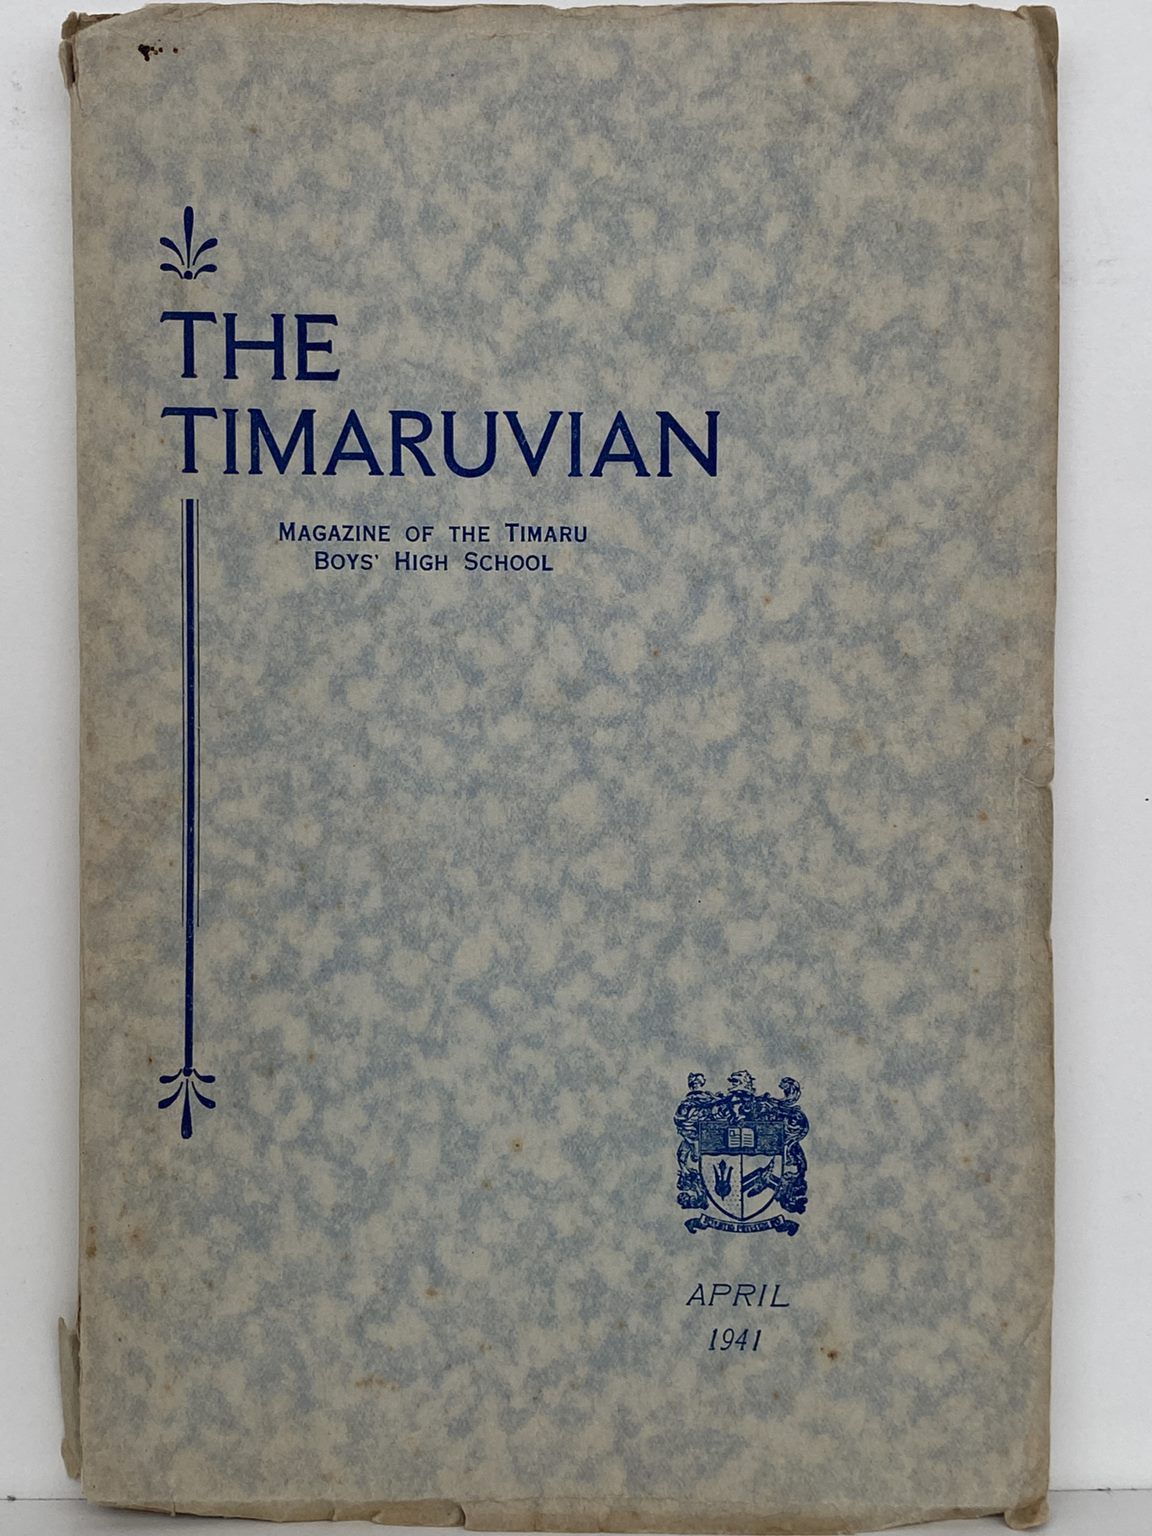 THE TIMARUVIAN: Magazine of the Timaru Boys' High School and its Old Boys' Association 1941